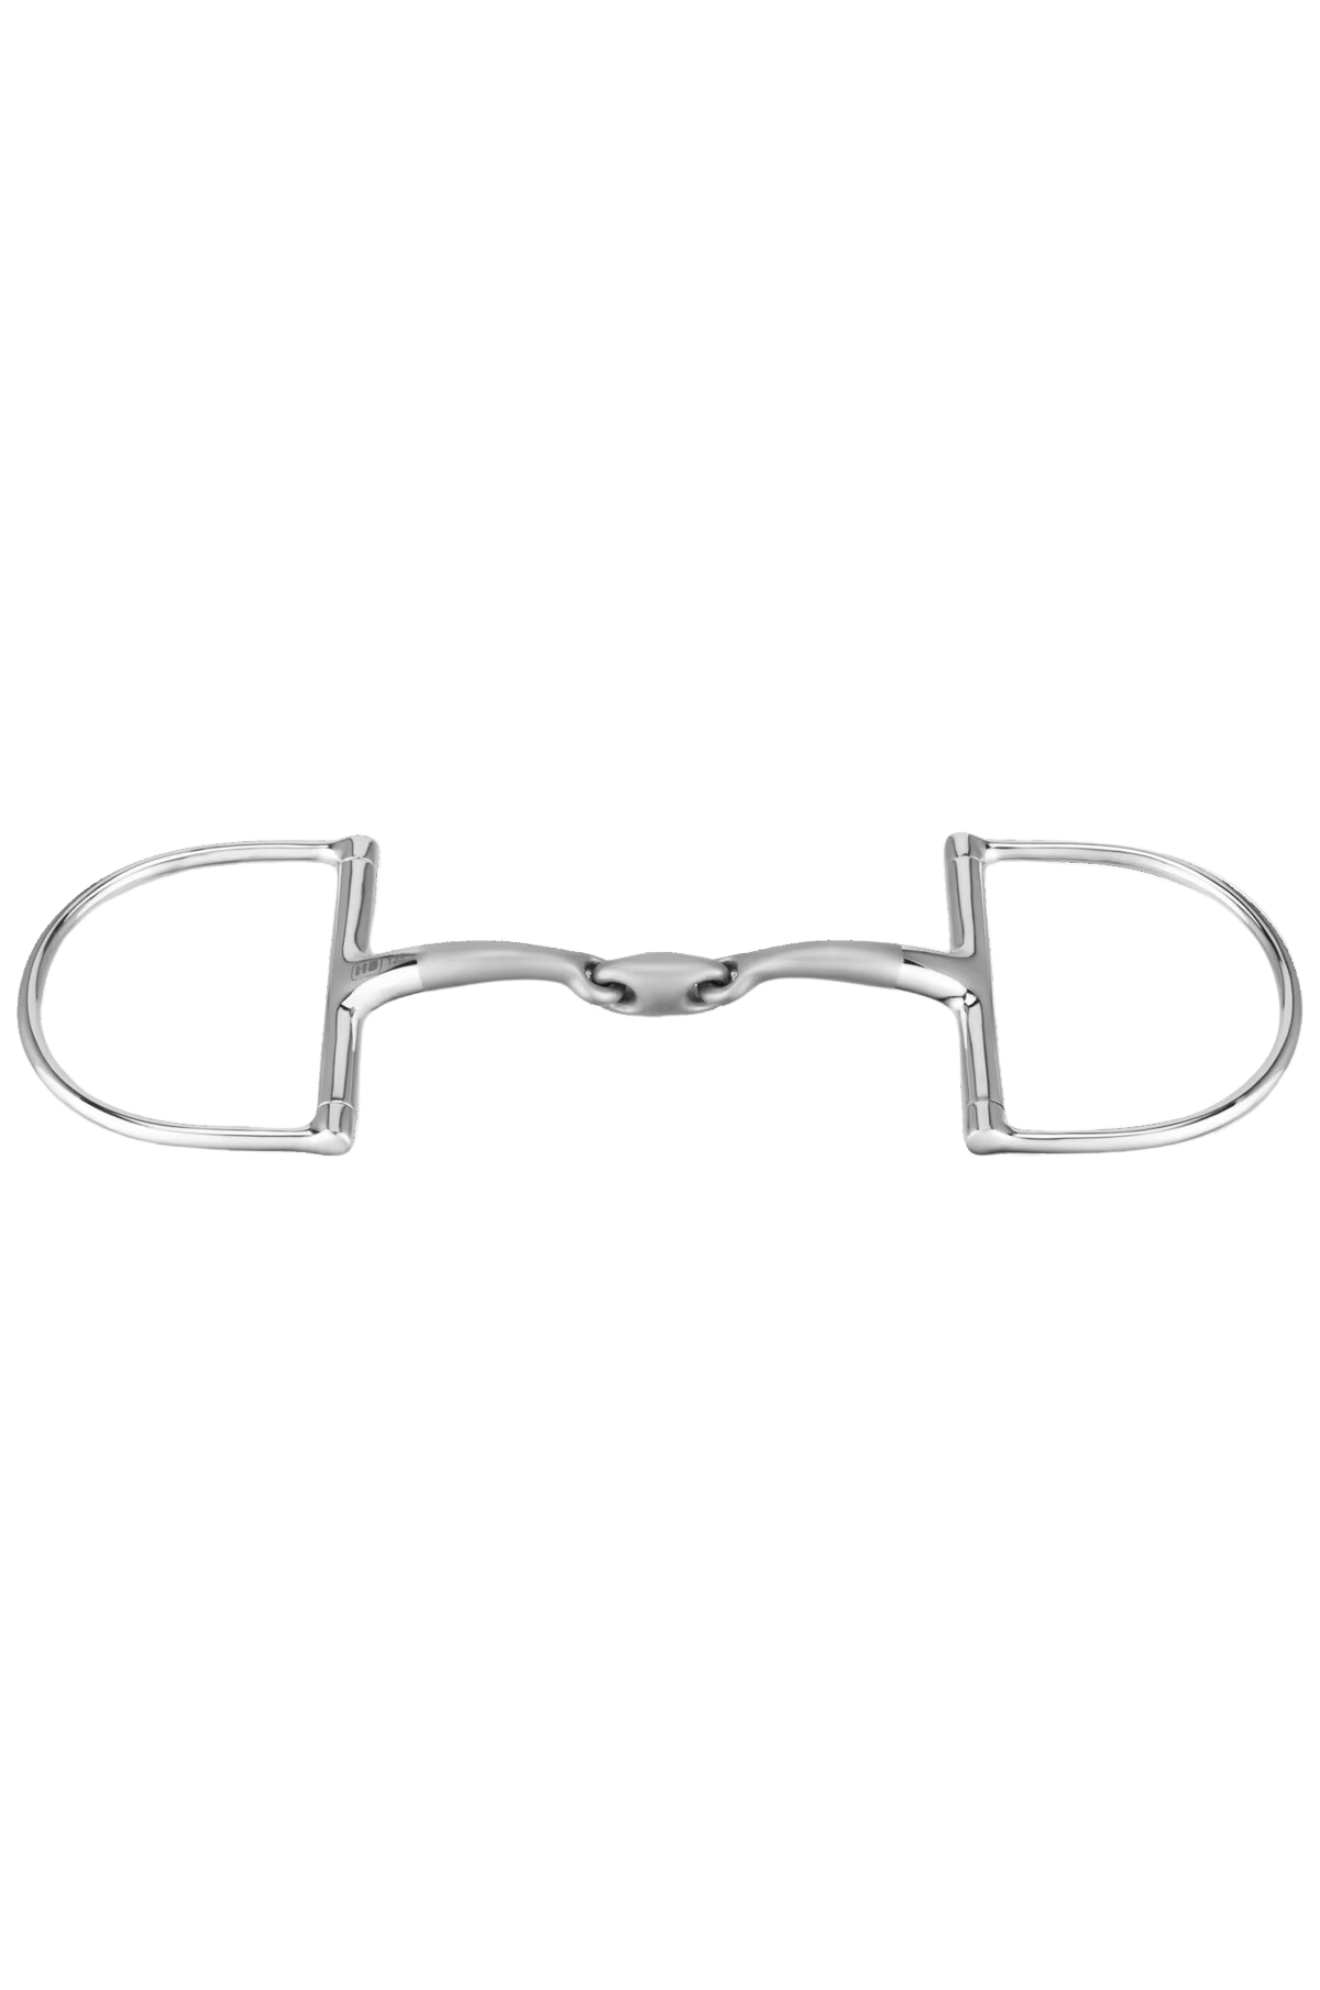 HERM SPRENGER SATINOX DOUBLE JOINT D-RING SNAFFLE